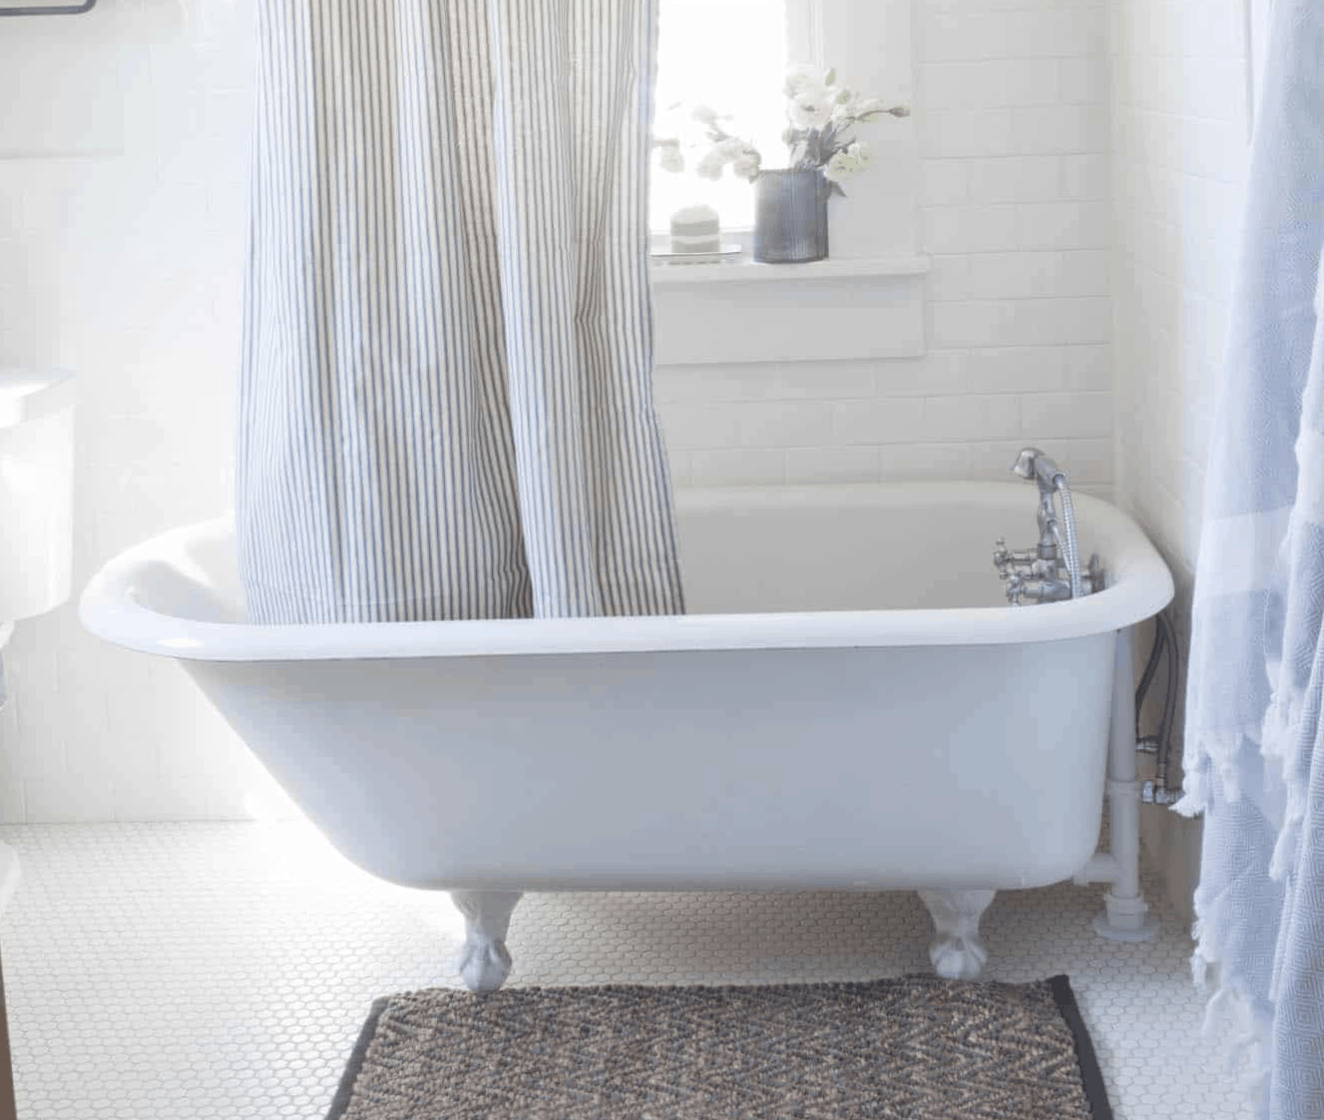 Refinishing A Clawfoot Tub Before And, How To Resurface A Clawfoot Bathtub